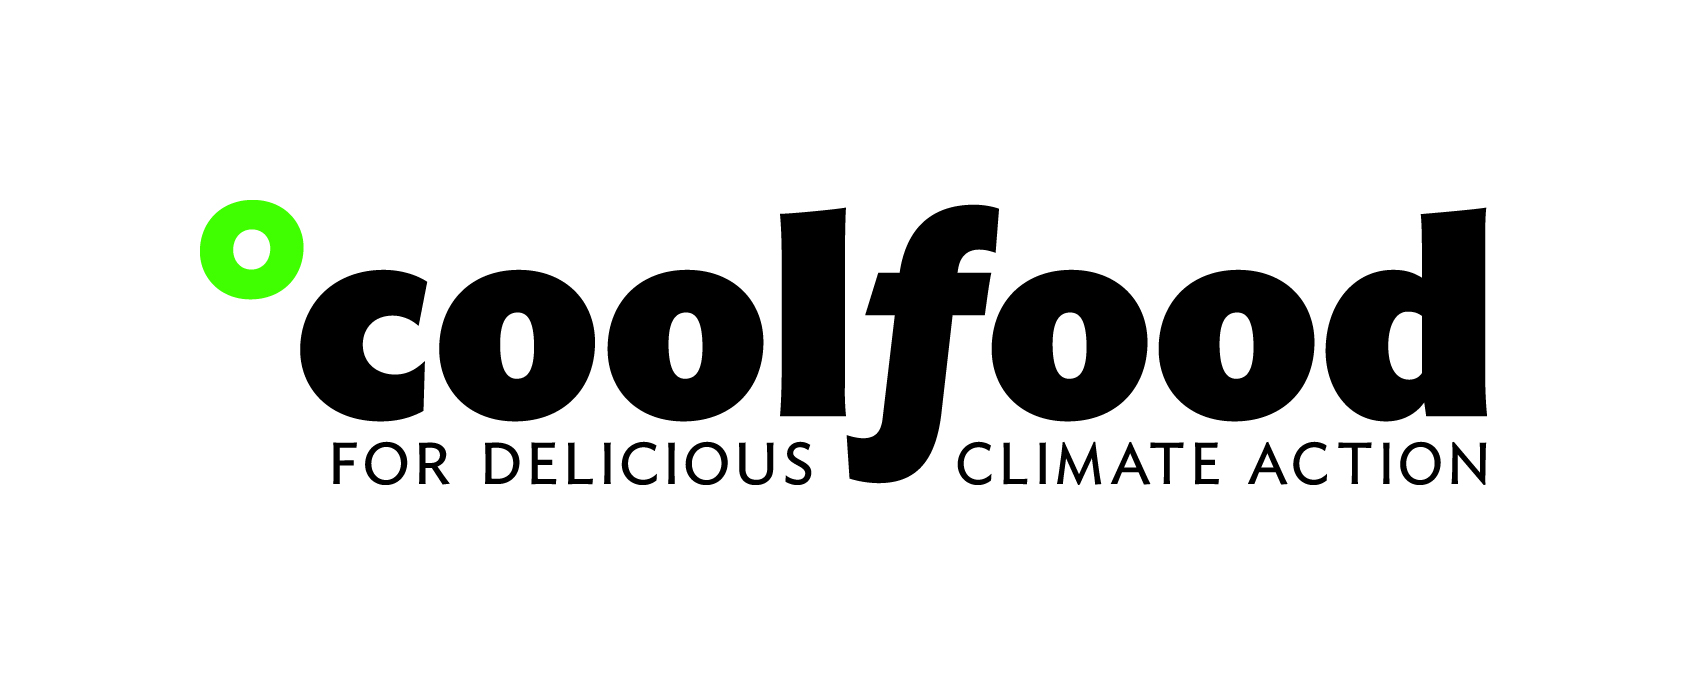 white image with cool food logo